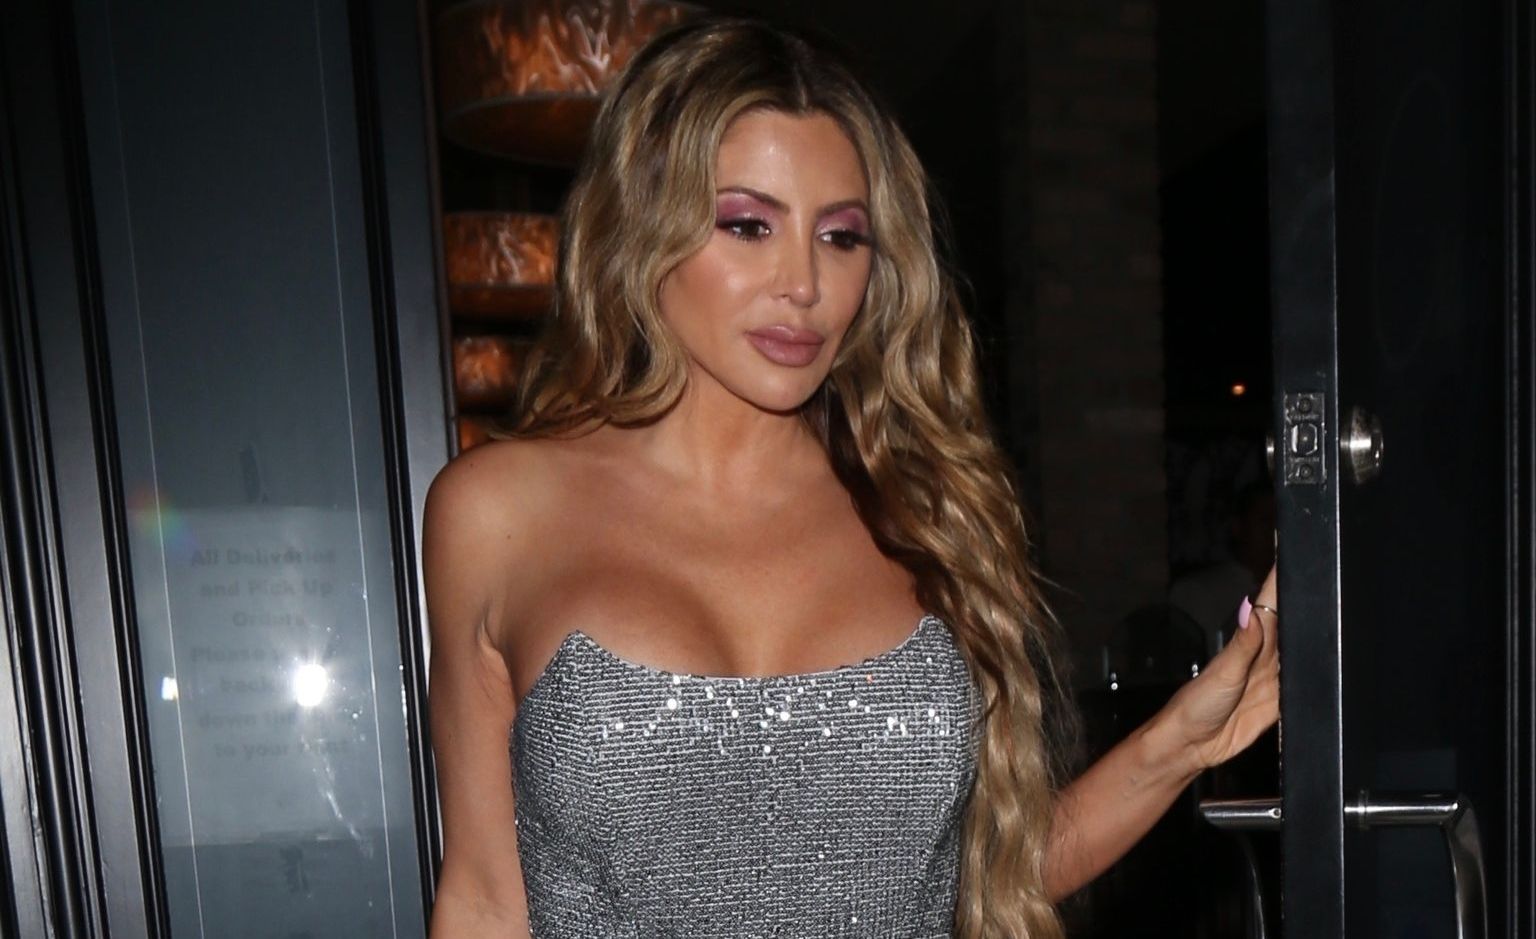 Busty Larsa Pippen Spotted Leaving Dinner At Craig’s 000600000000000000000000000000